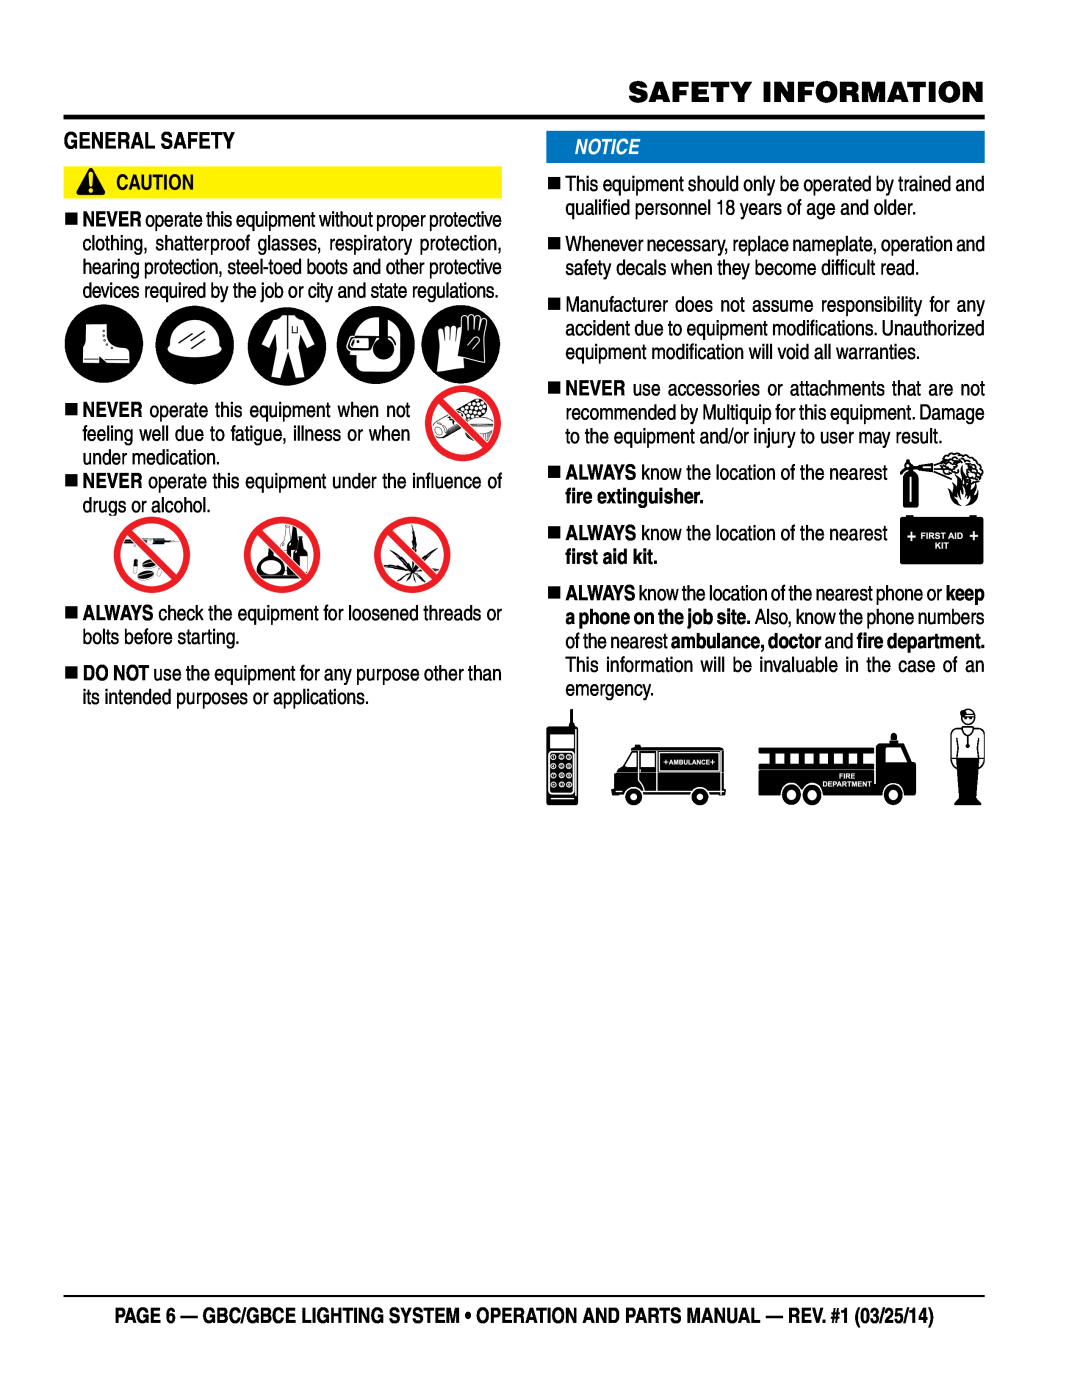 Multiquip gbe/gbce manual general saFety, Safety Information,  ALWAYS know the location of the nearest fire extinguisher 